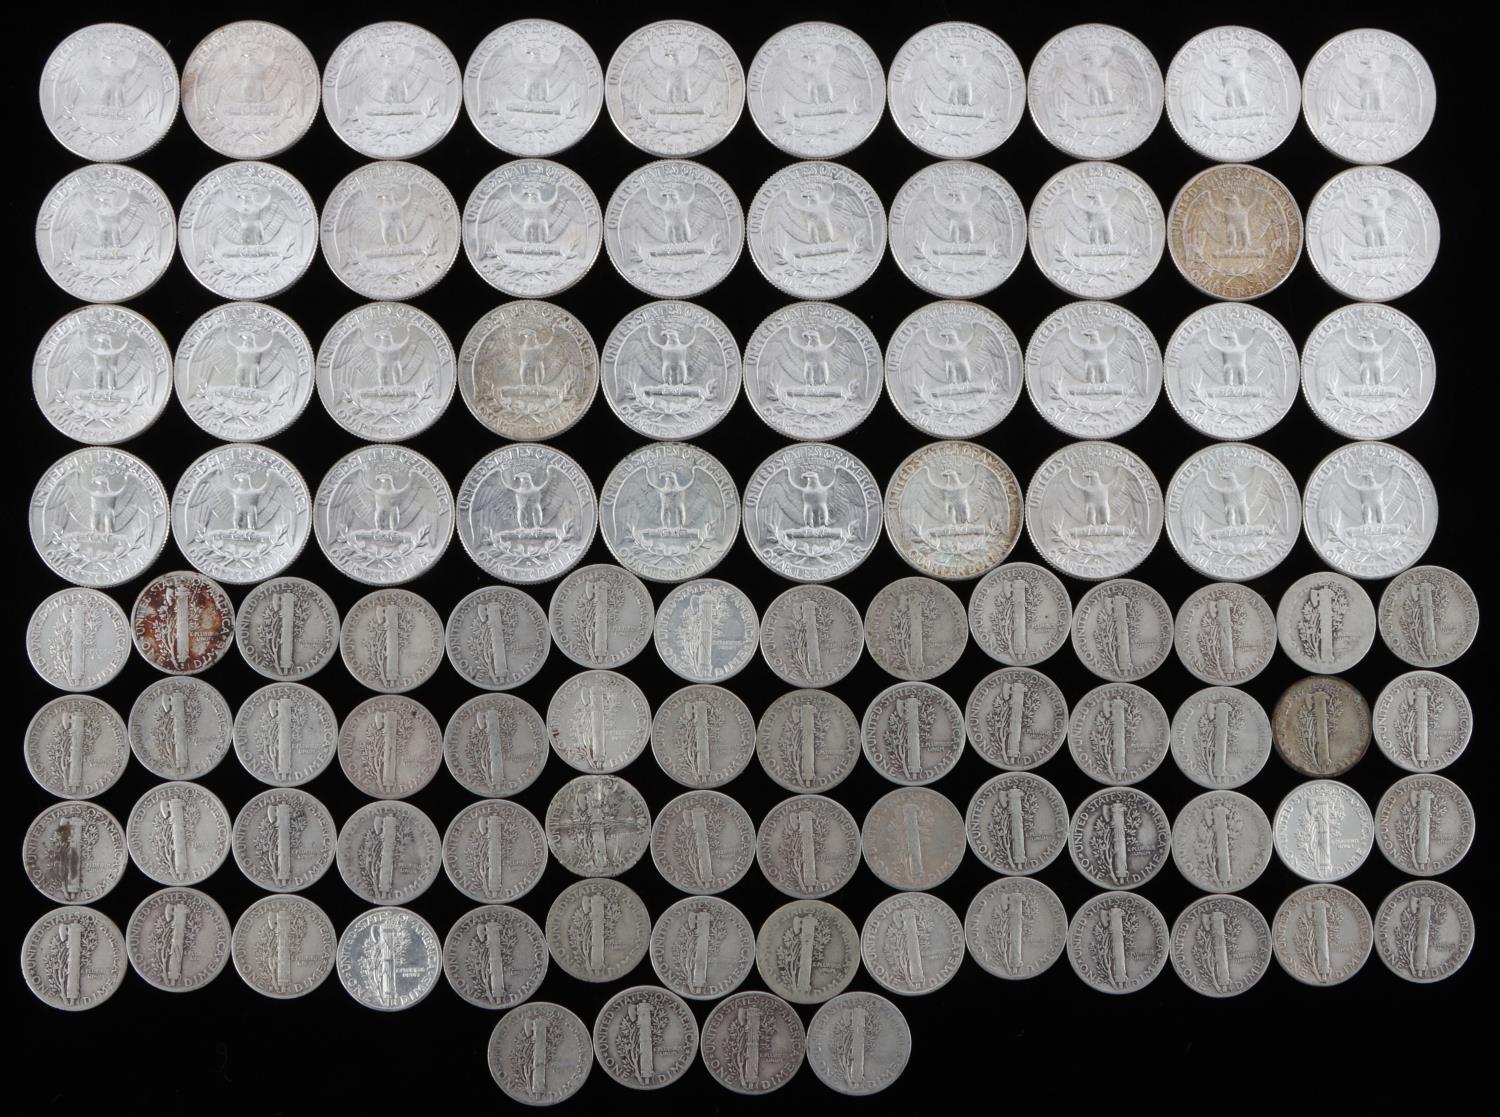 $16 FACE BU 90% SILVER COIN QUARTERS AND DIMES